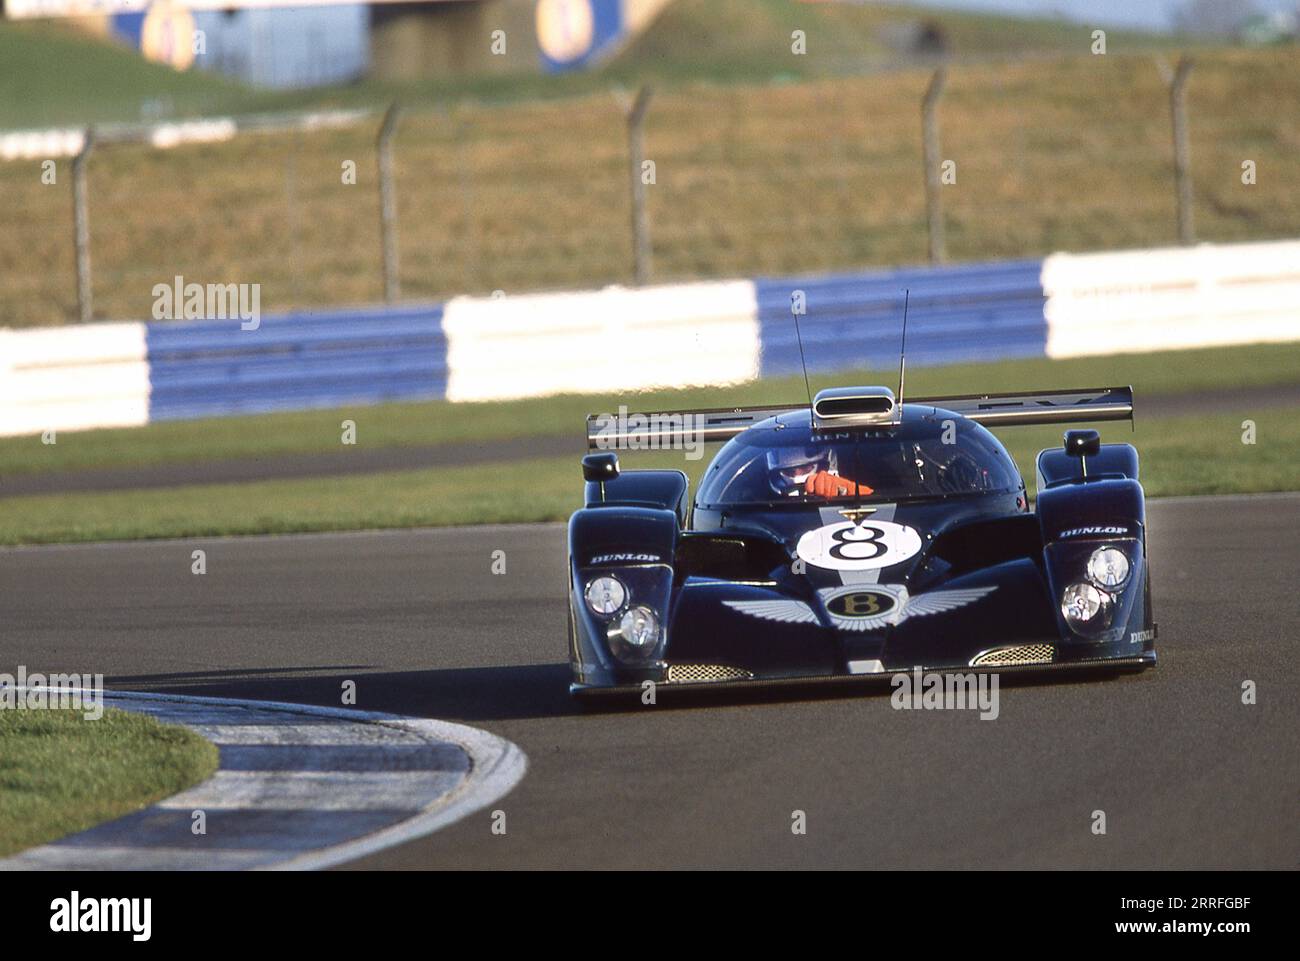 Bentley Speed Eight Le Mans prototype testing at Silverstone in January 2001 Stock Photo